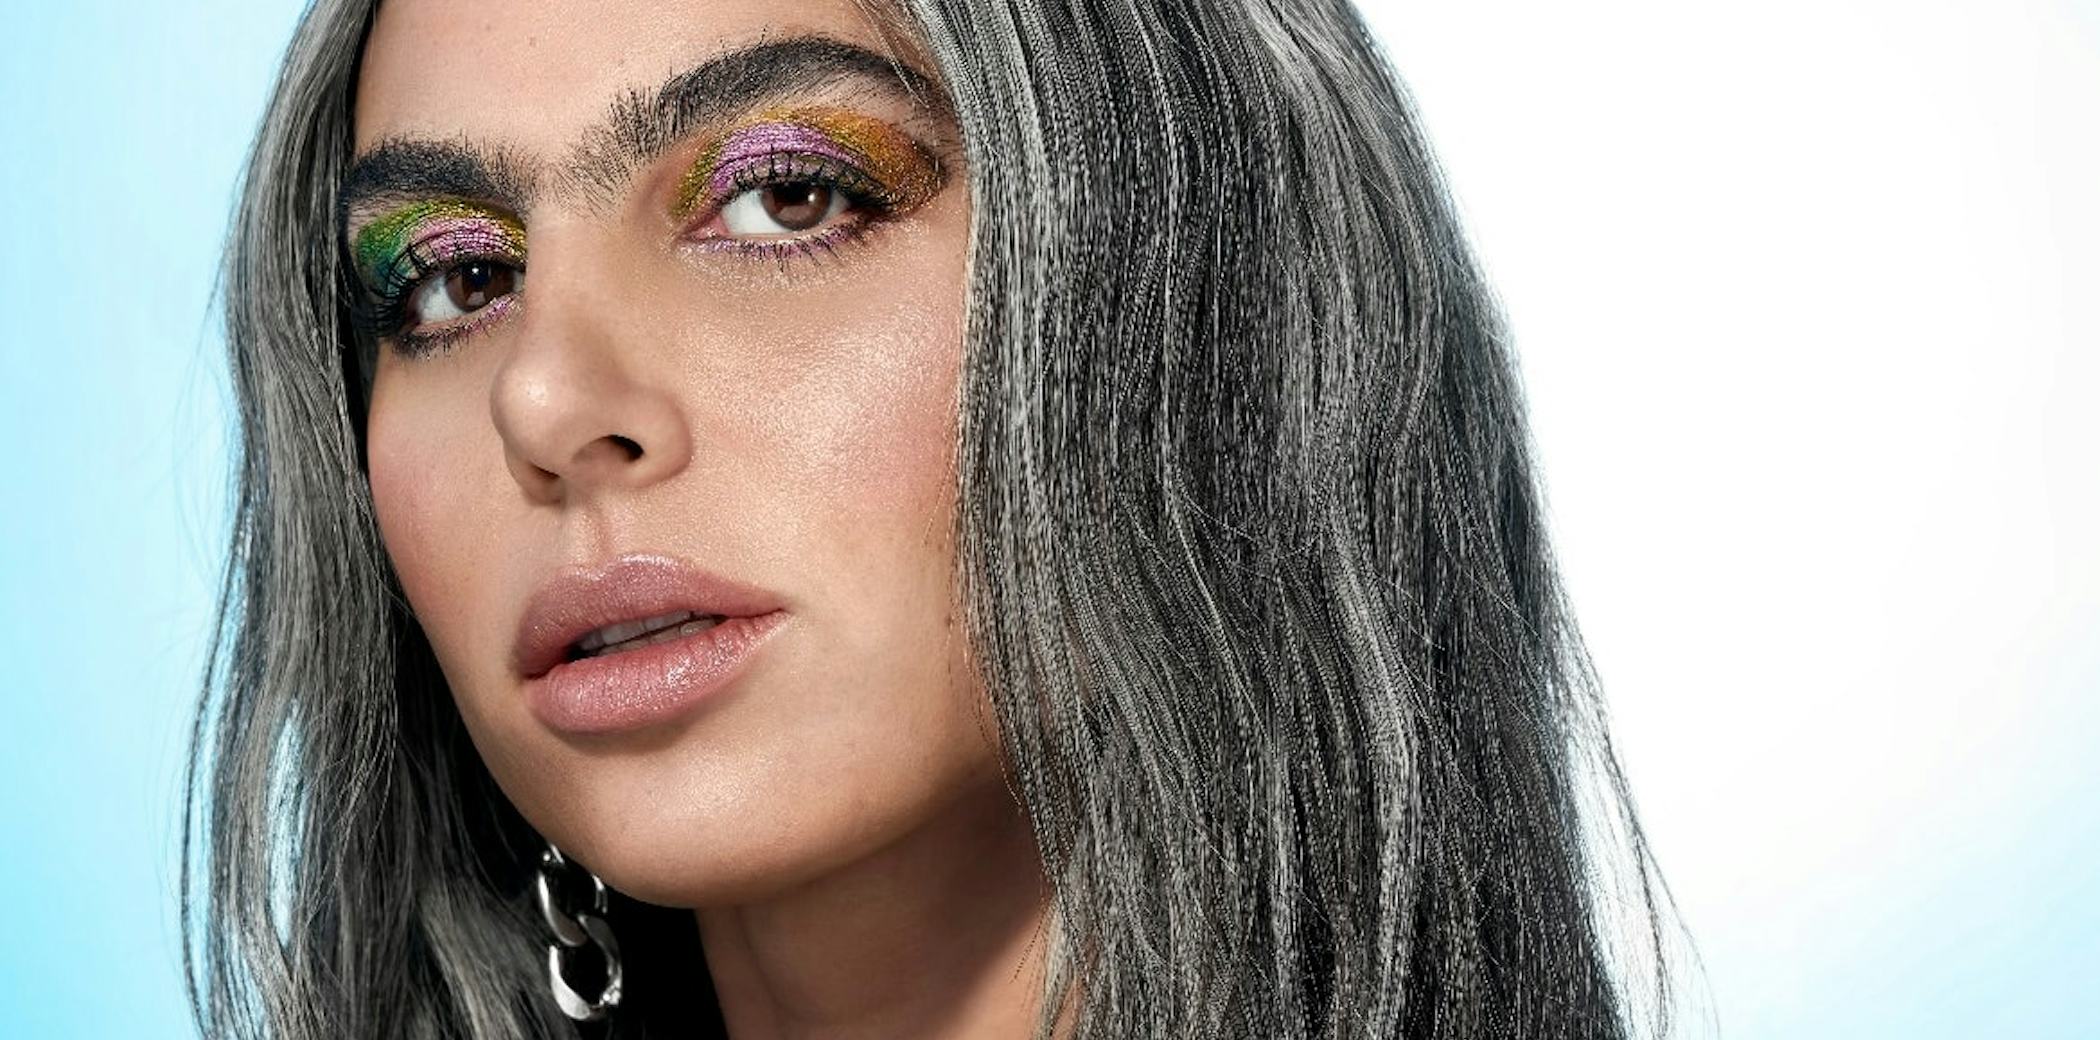 Iranian Beauty Founder Sharareh Siadat Wants Makeup To Be About Liberation